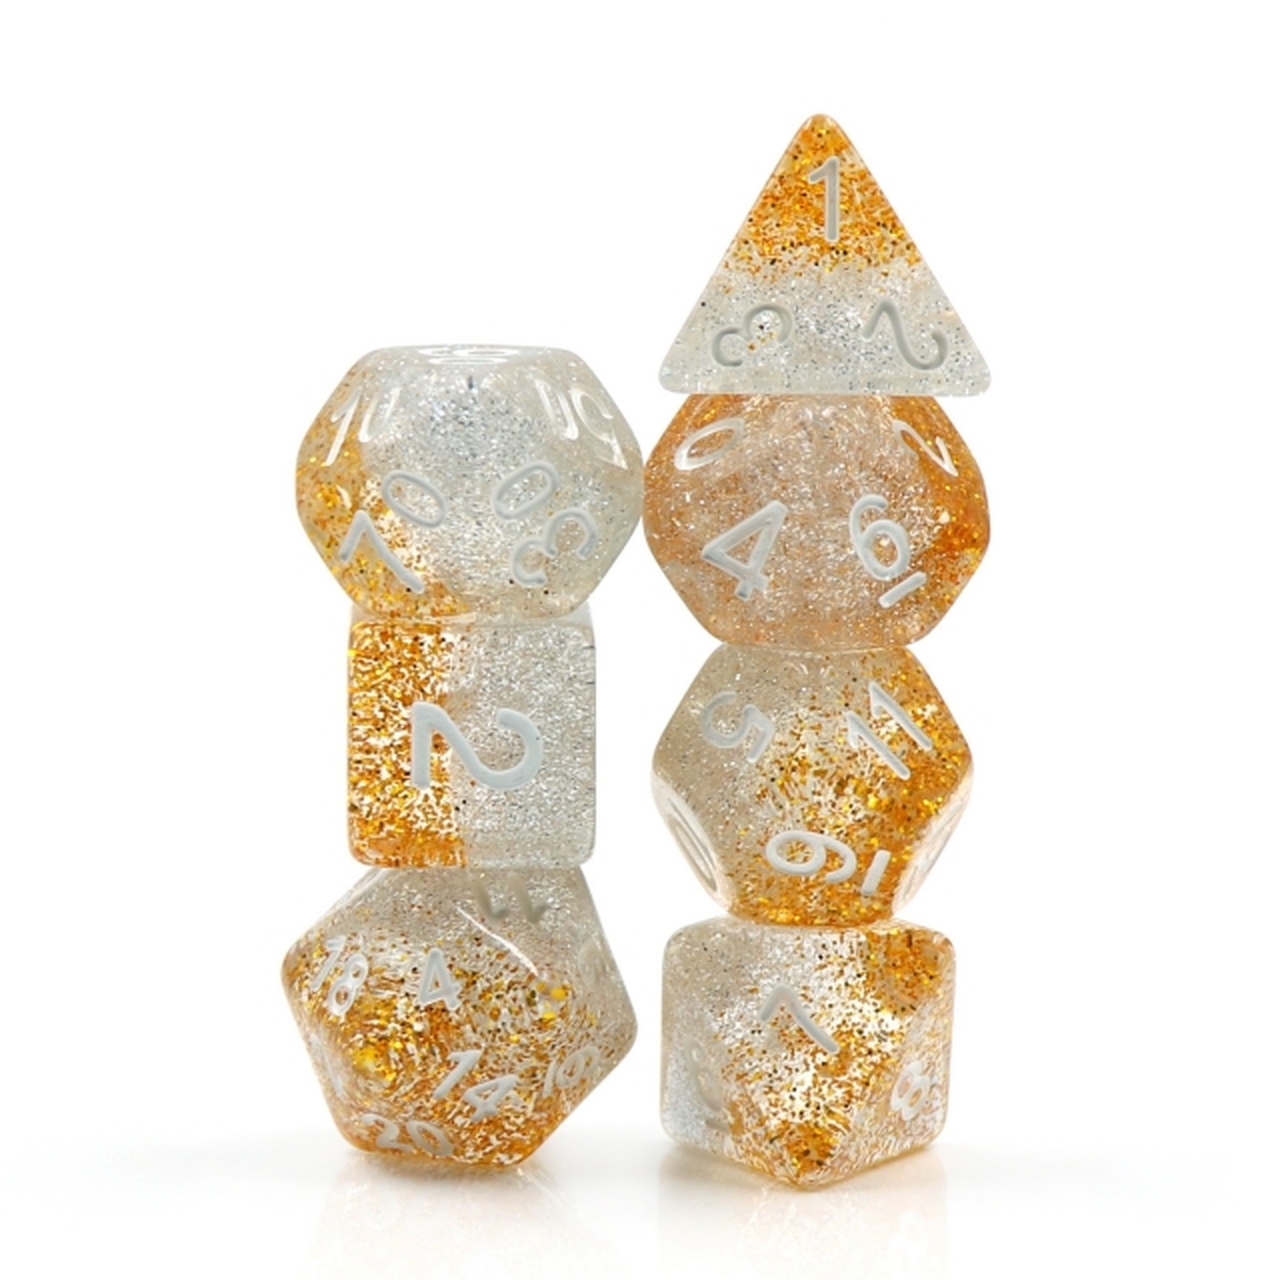 DND dice that are silver and gold and glittery.